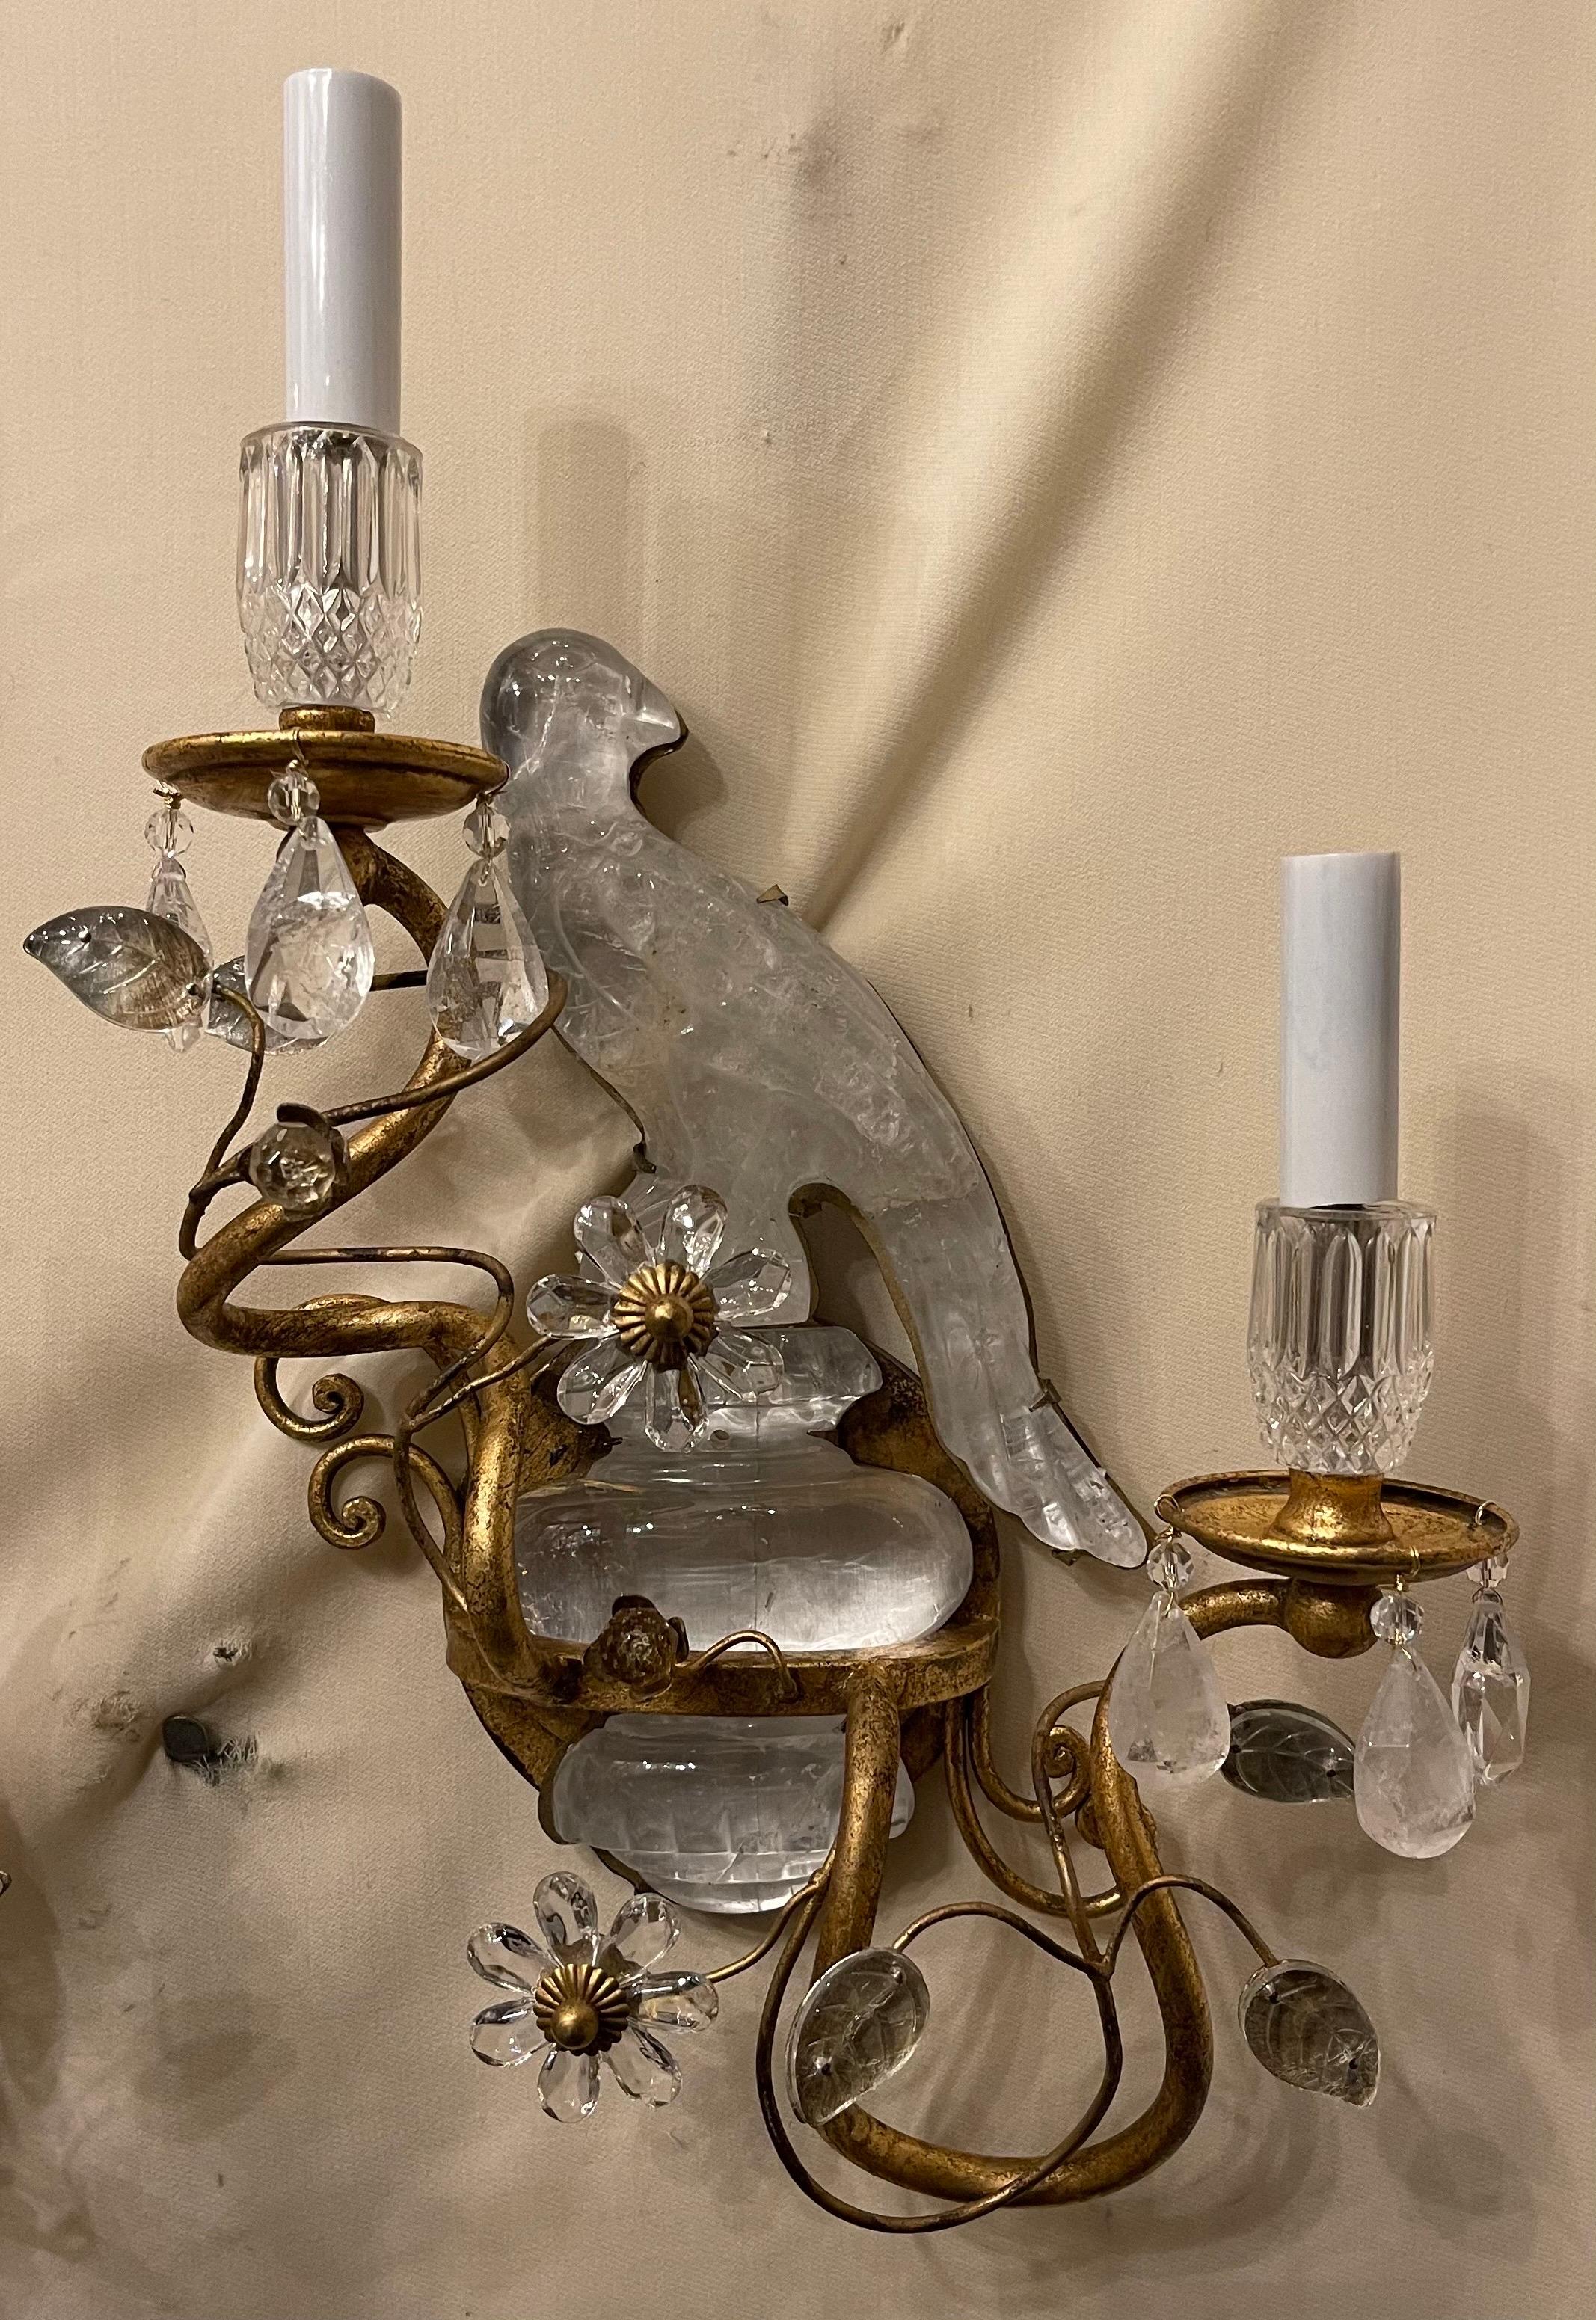 A Wonderful Pair Of Maison Baguès Style Two Candelabra Light Rock Crystal Bird / Parrot Resting On Urn Petite Sconces.
Both Rock Crystal Birds Have Been Repaired And Wiring Has Been Updated.